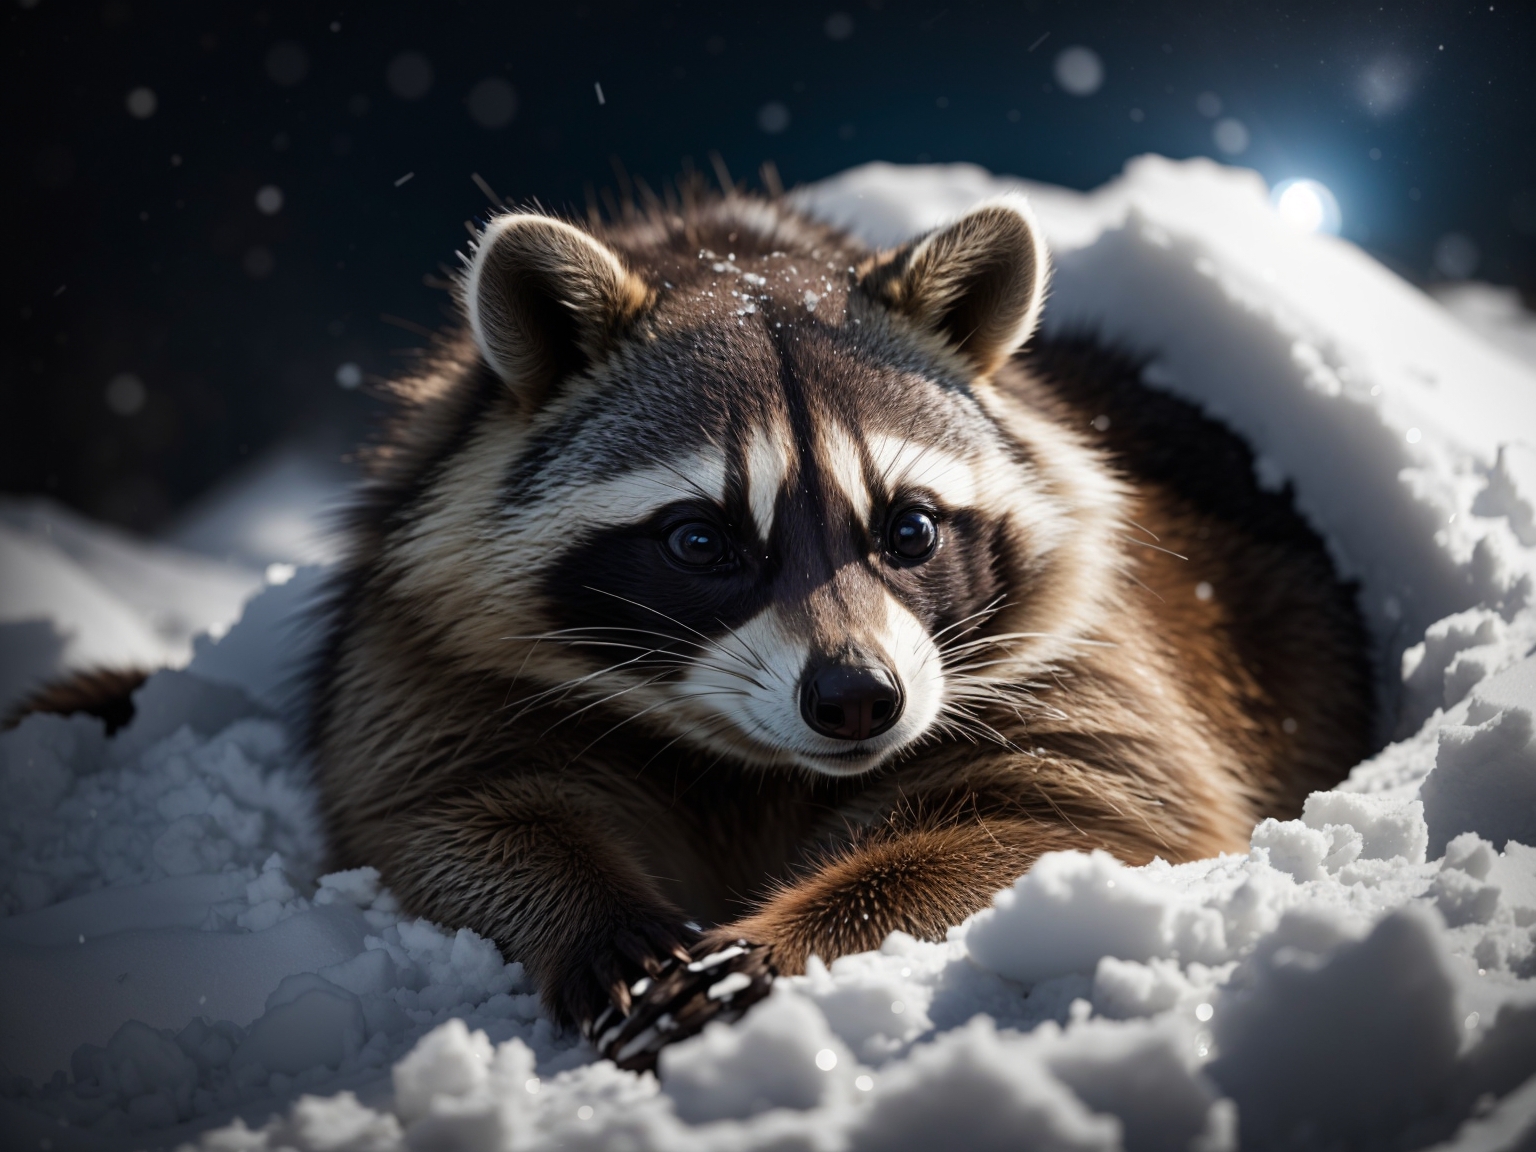 A Cold Raccoon in snow